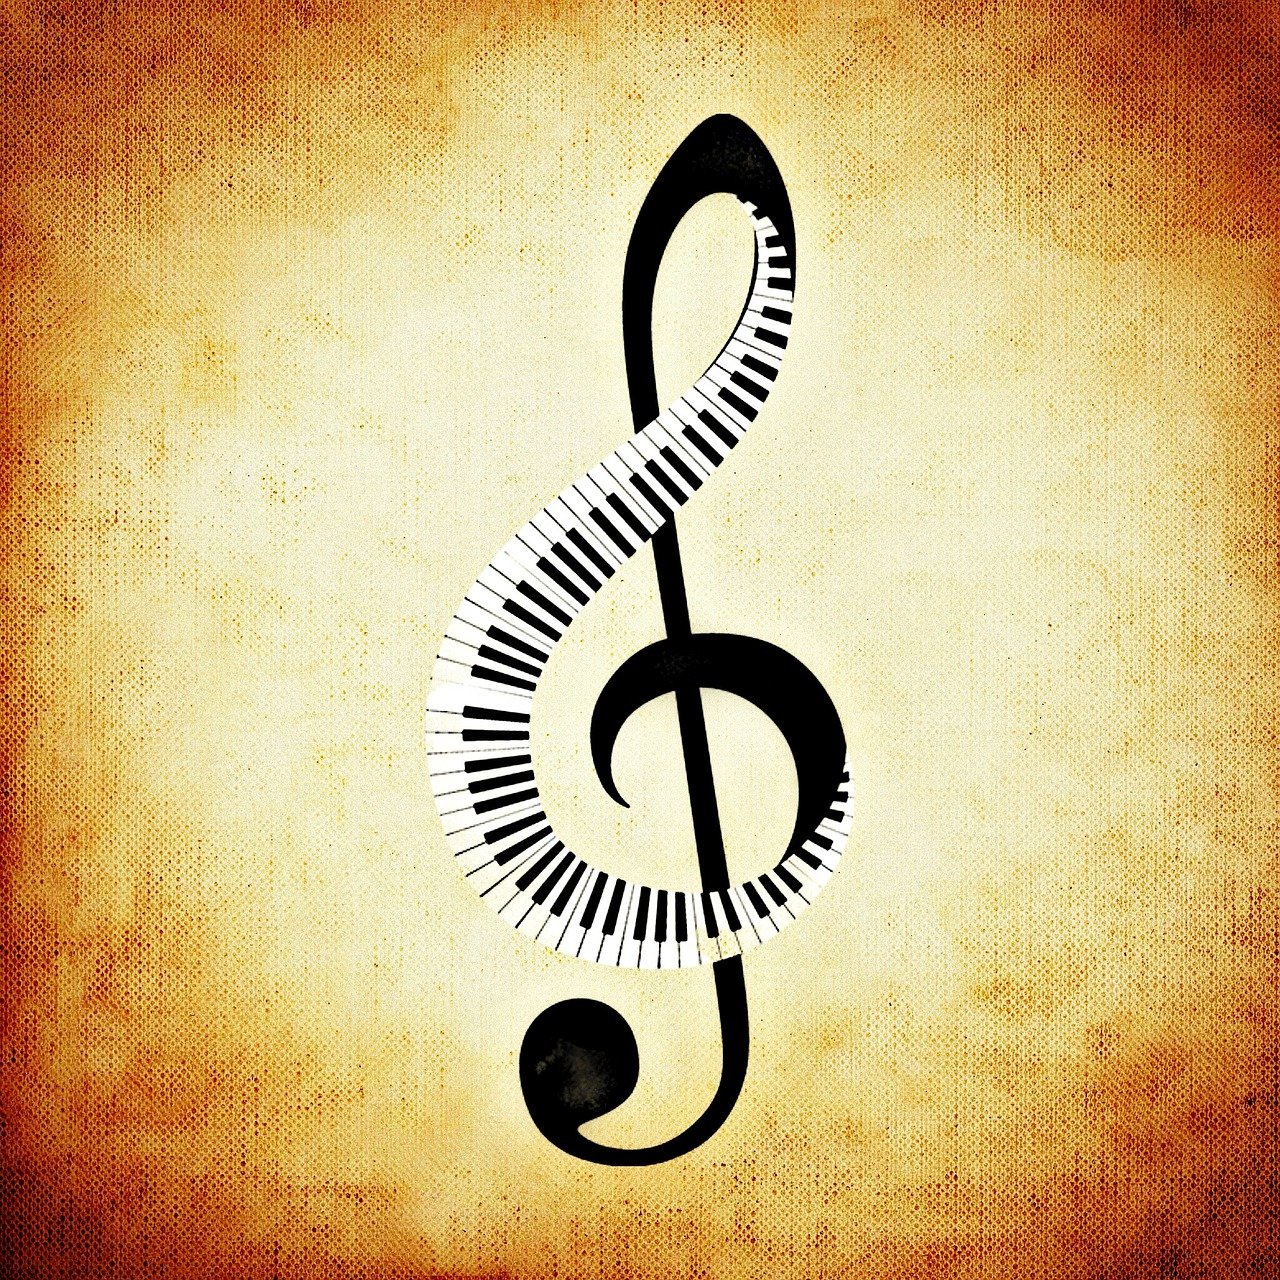 a musical note sitting on top of a piano keyboard, an album cover, by Robert Medley, pixabay, baroque, infinity symbol, on old paper, avatar image, retro style ”